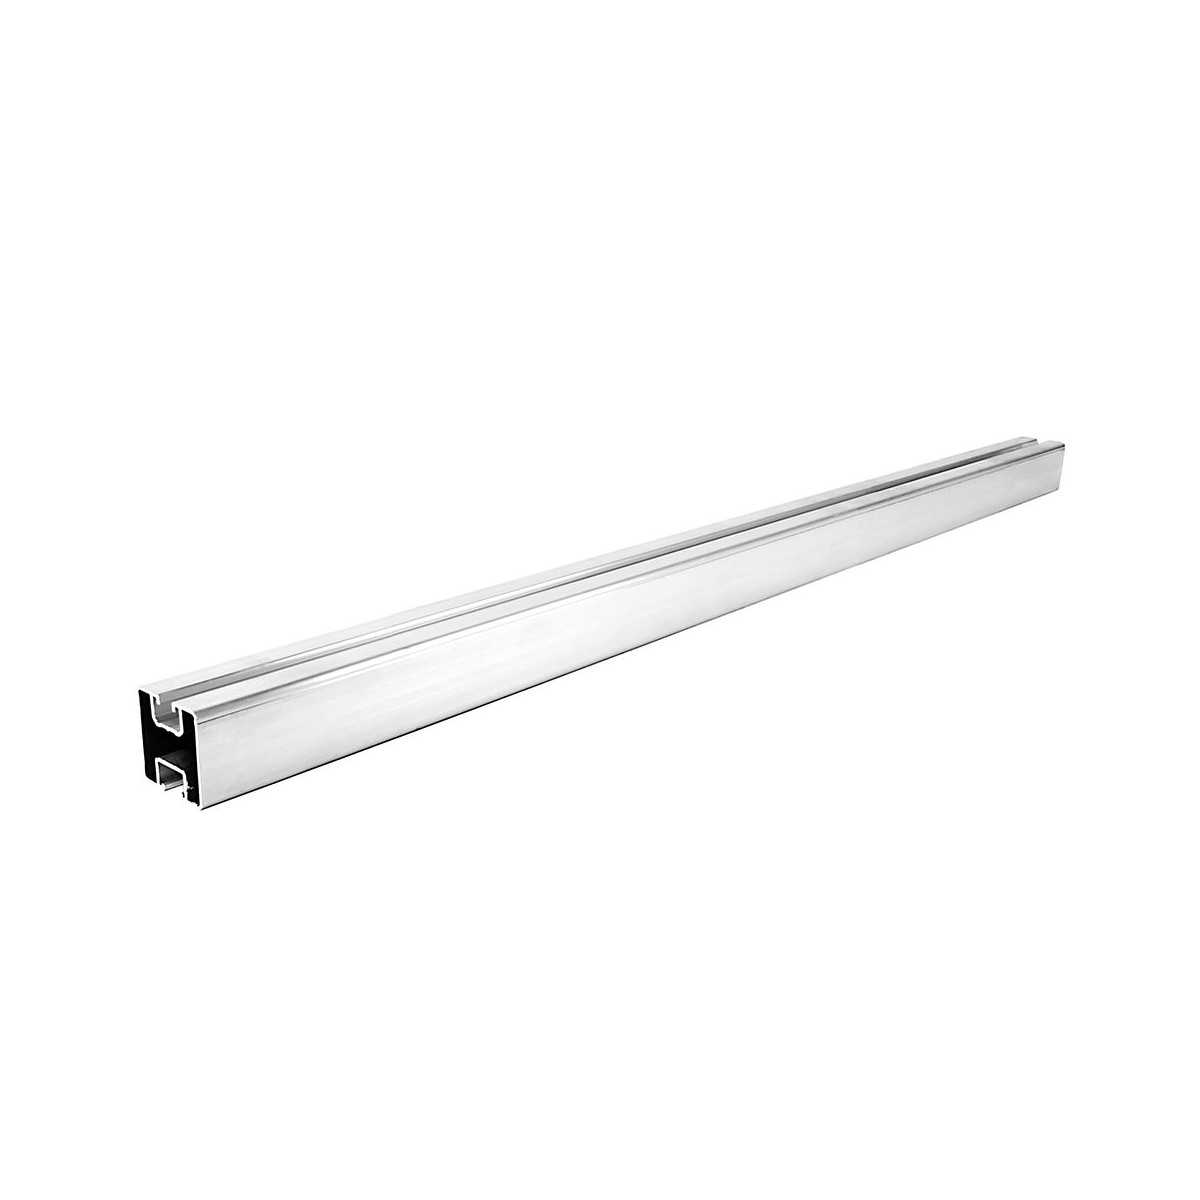 Aluminum bar 4x4x200 cm for mounting panels OF001315